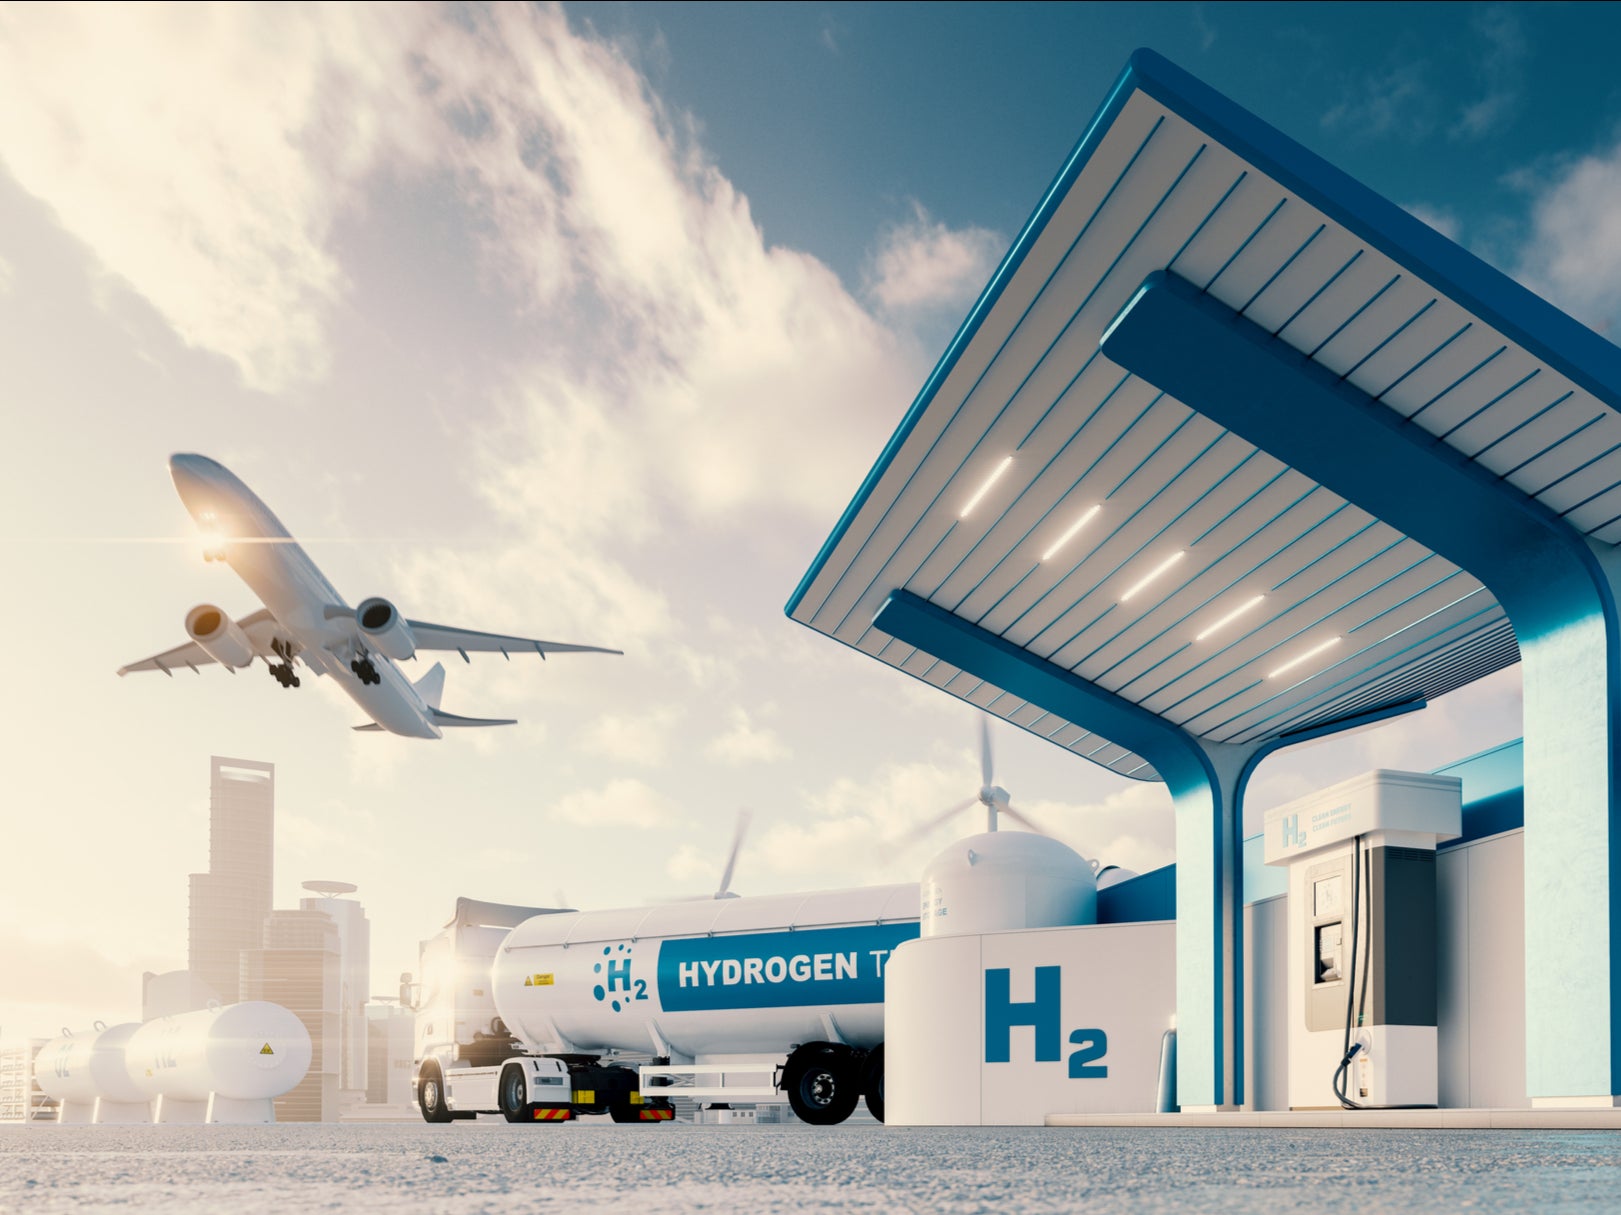 Hydrogen gas station with lorry and aeroplane